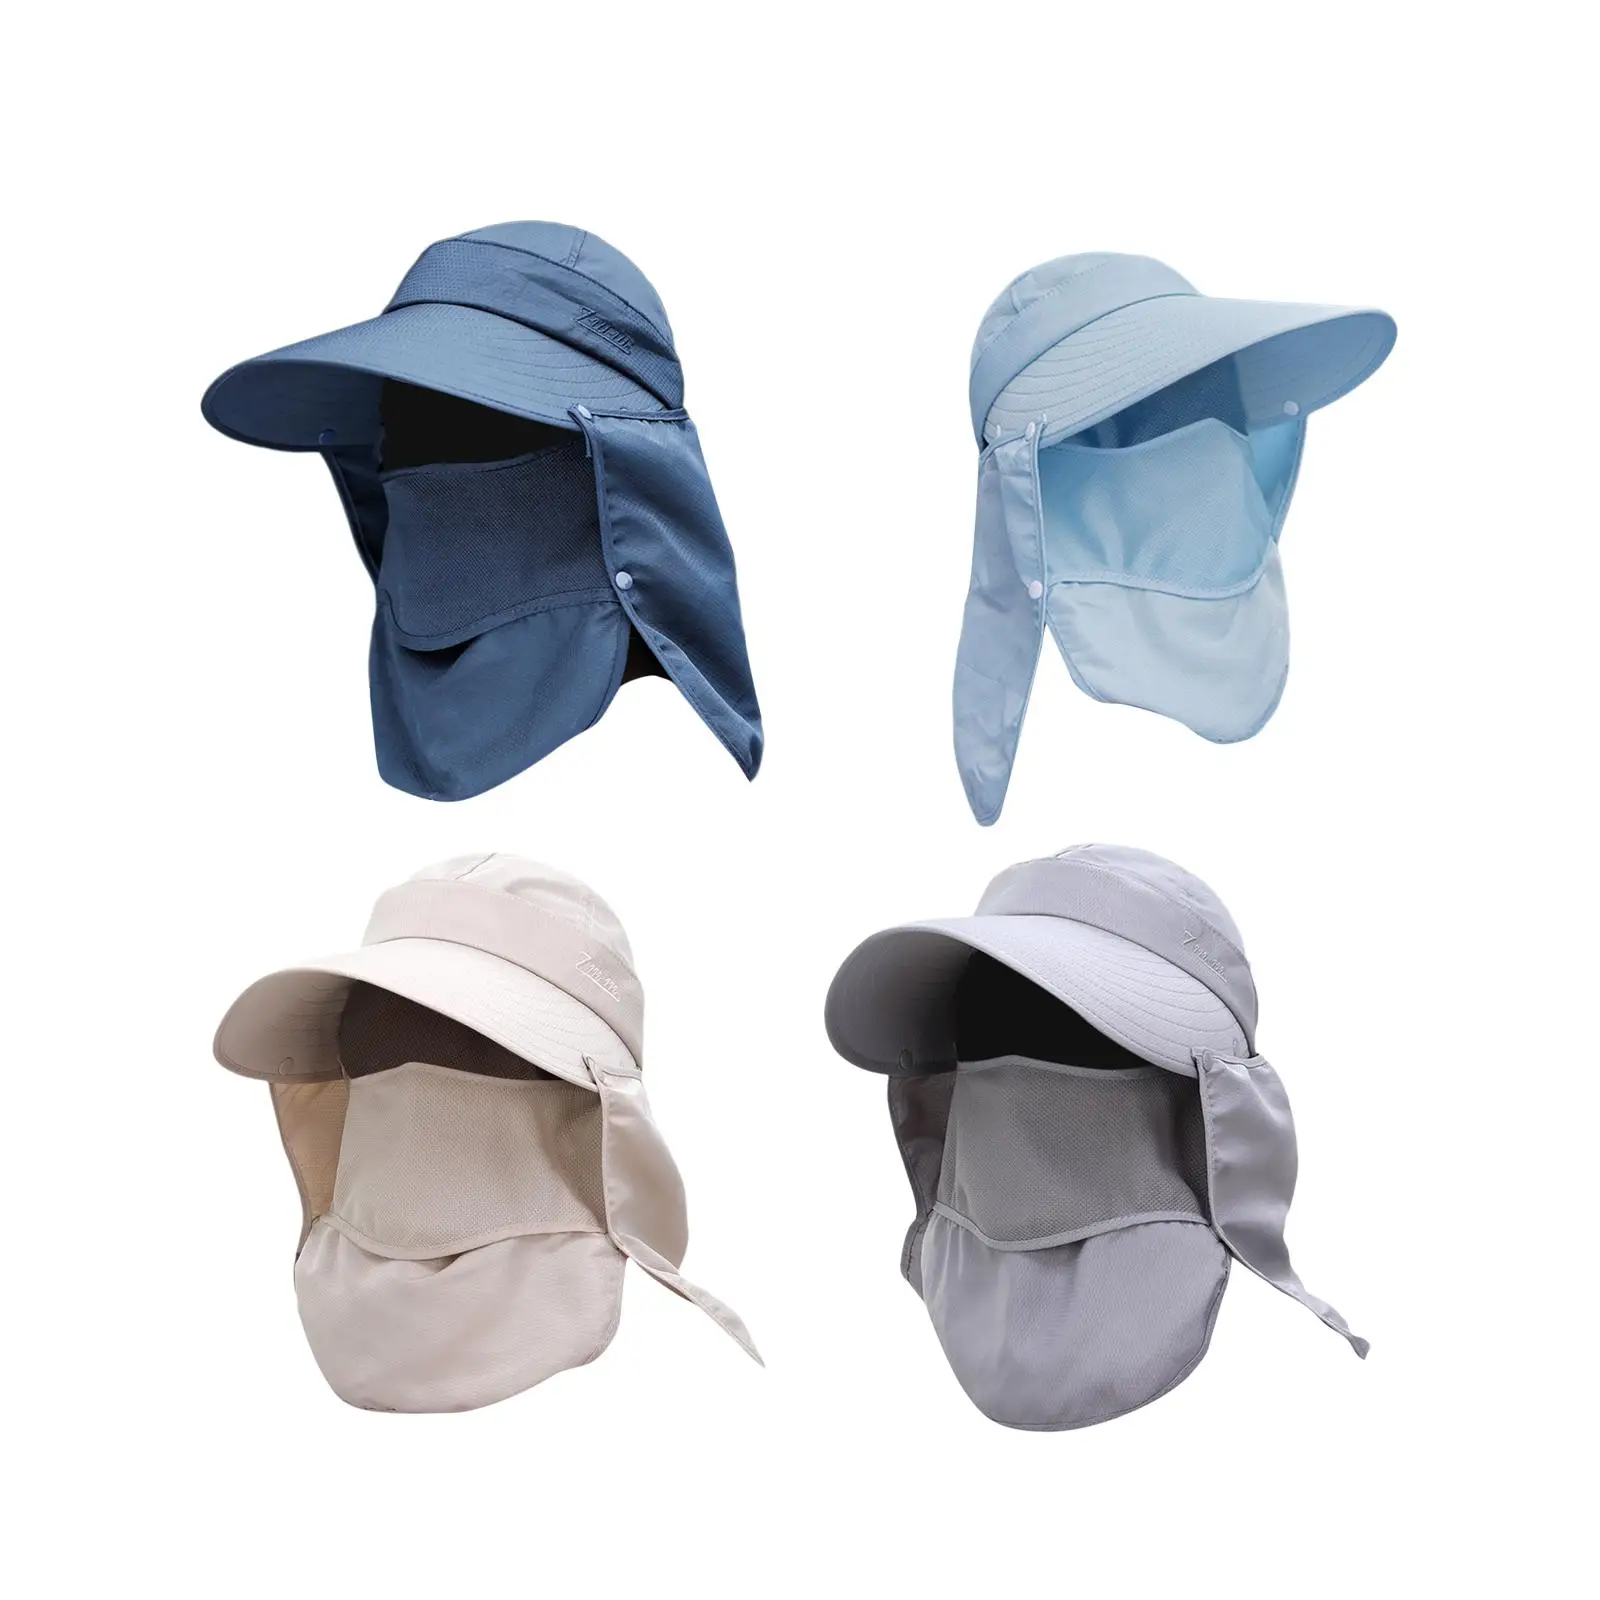 Golf with Detachable Neck Flap Cover Cover Visor Sun Hap for Climbing Backpacking Summer Women Men Hunting